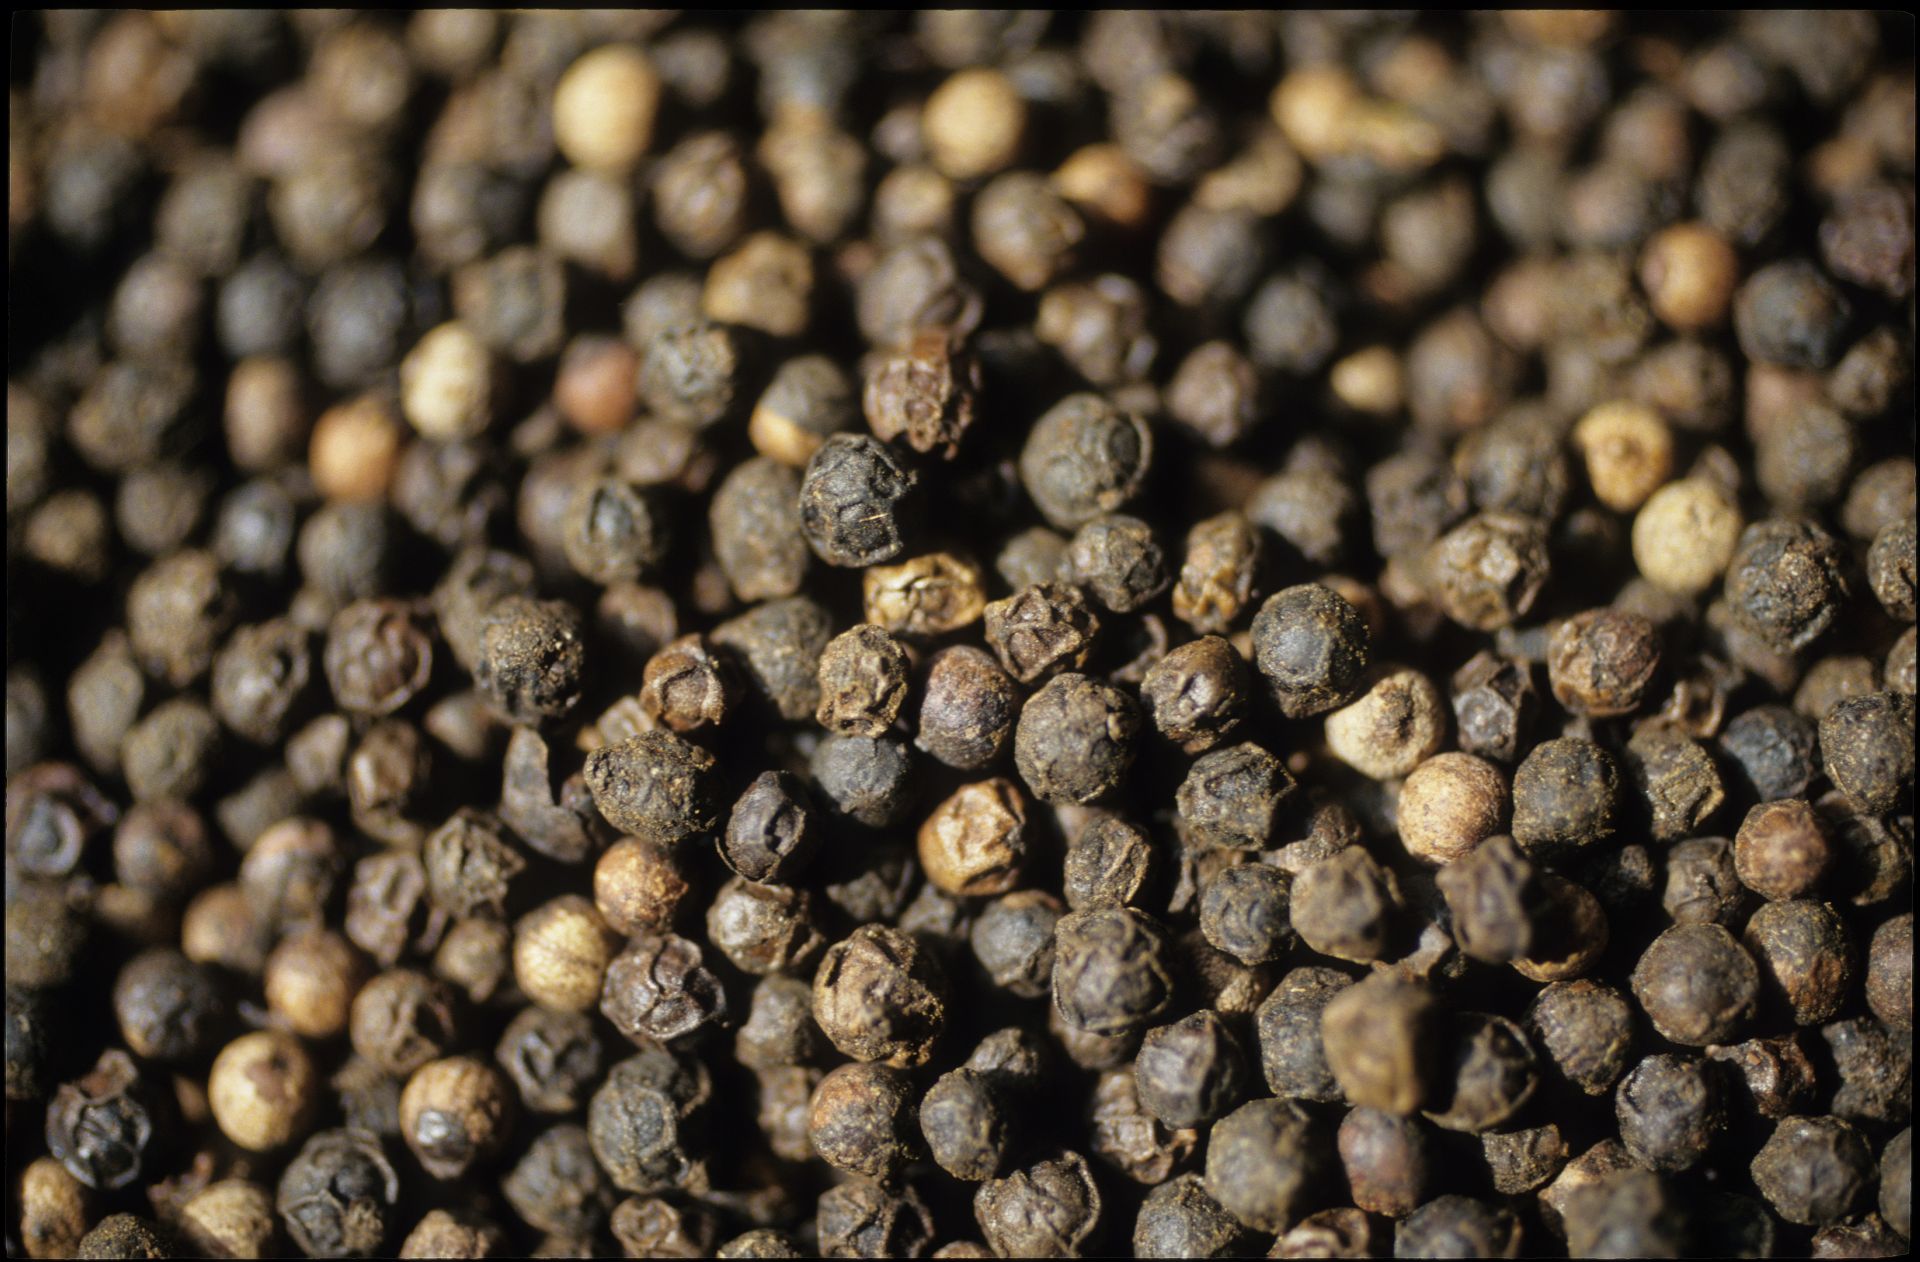 A Story of Pepper, the World’s Most Important and Underappreciated Spice